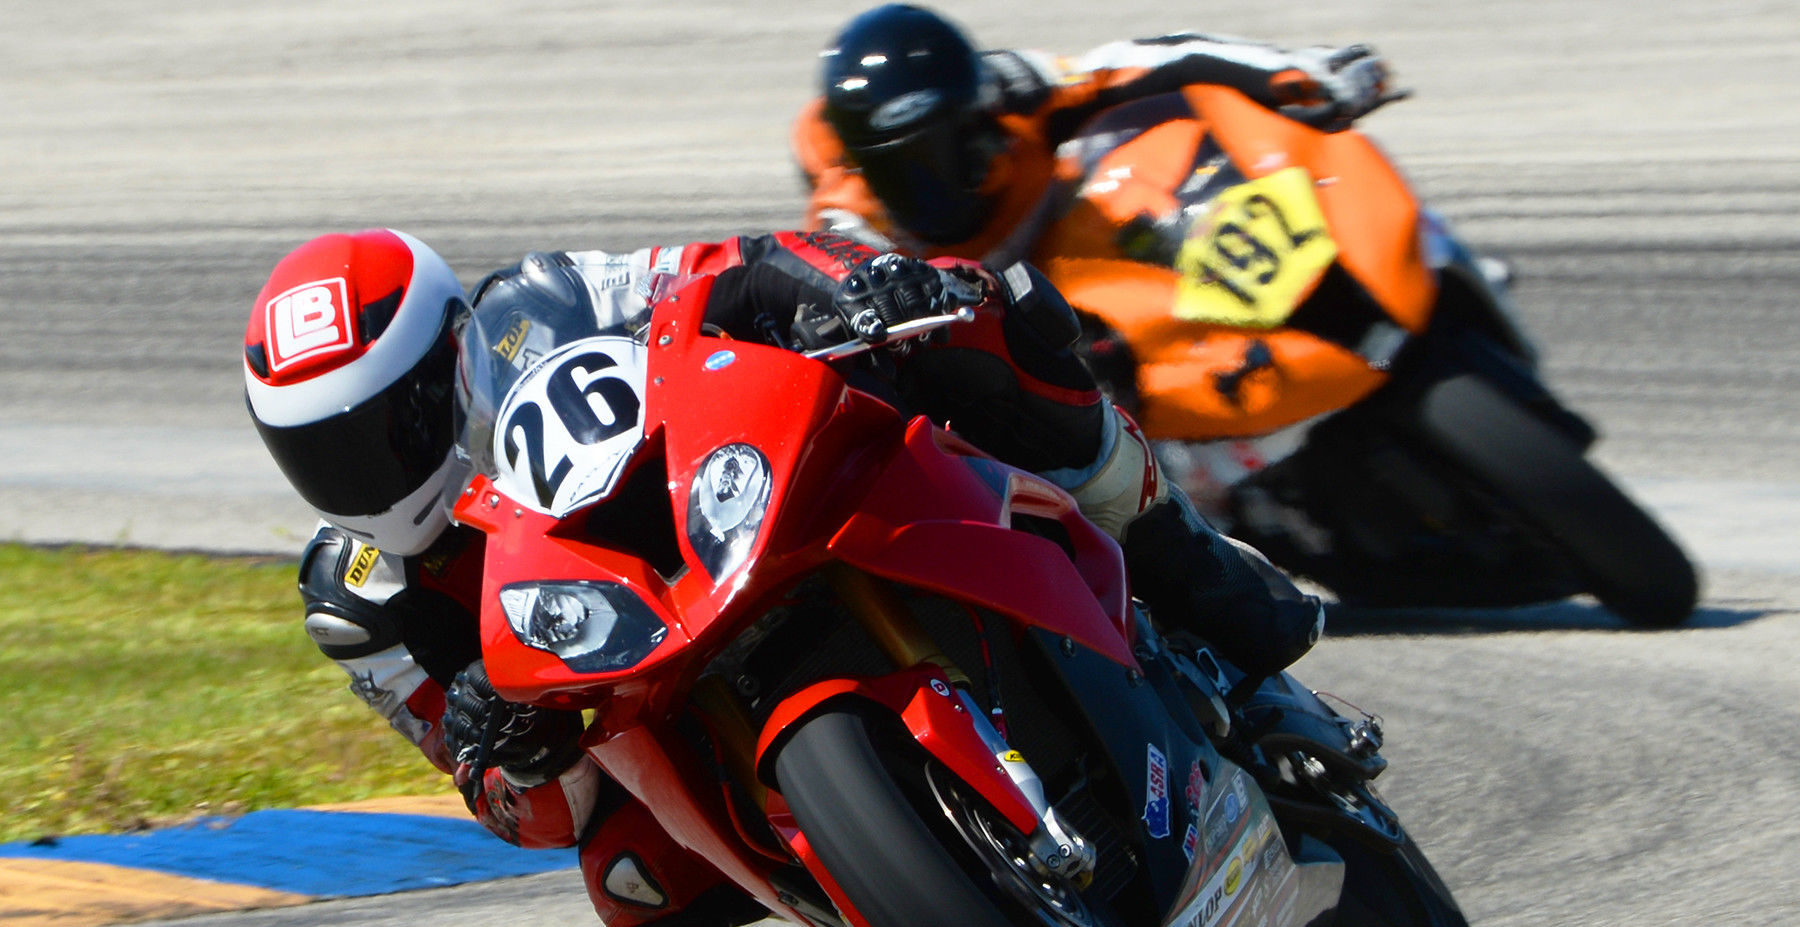 Lloyd Bayley (26) leading Amateur racer Alex Nieves, Jr. (192) during the CCS Unlimited Grand Prix at Homestead-Miami Speedway, in Homestead, Florida. Photo by Lisa Theobald, courtesy of ASRA/CCS.